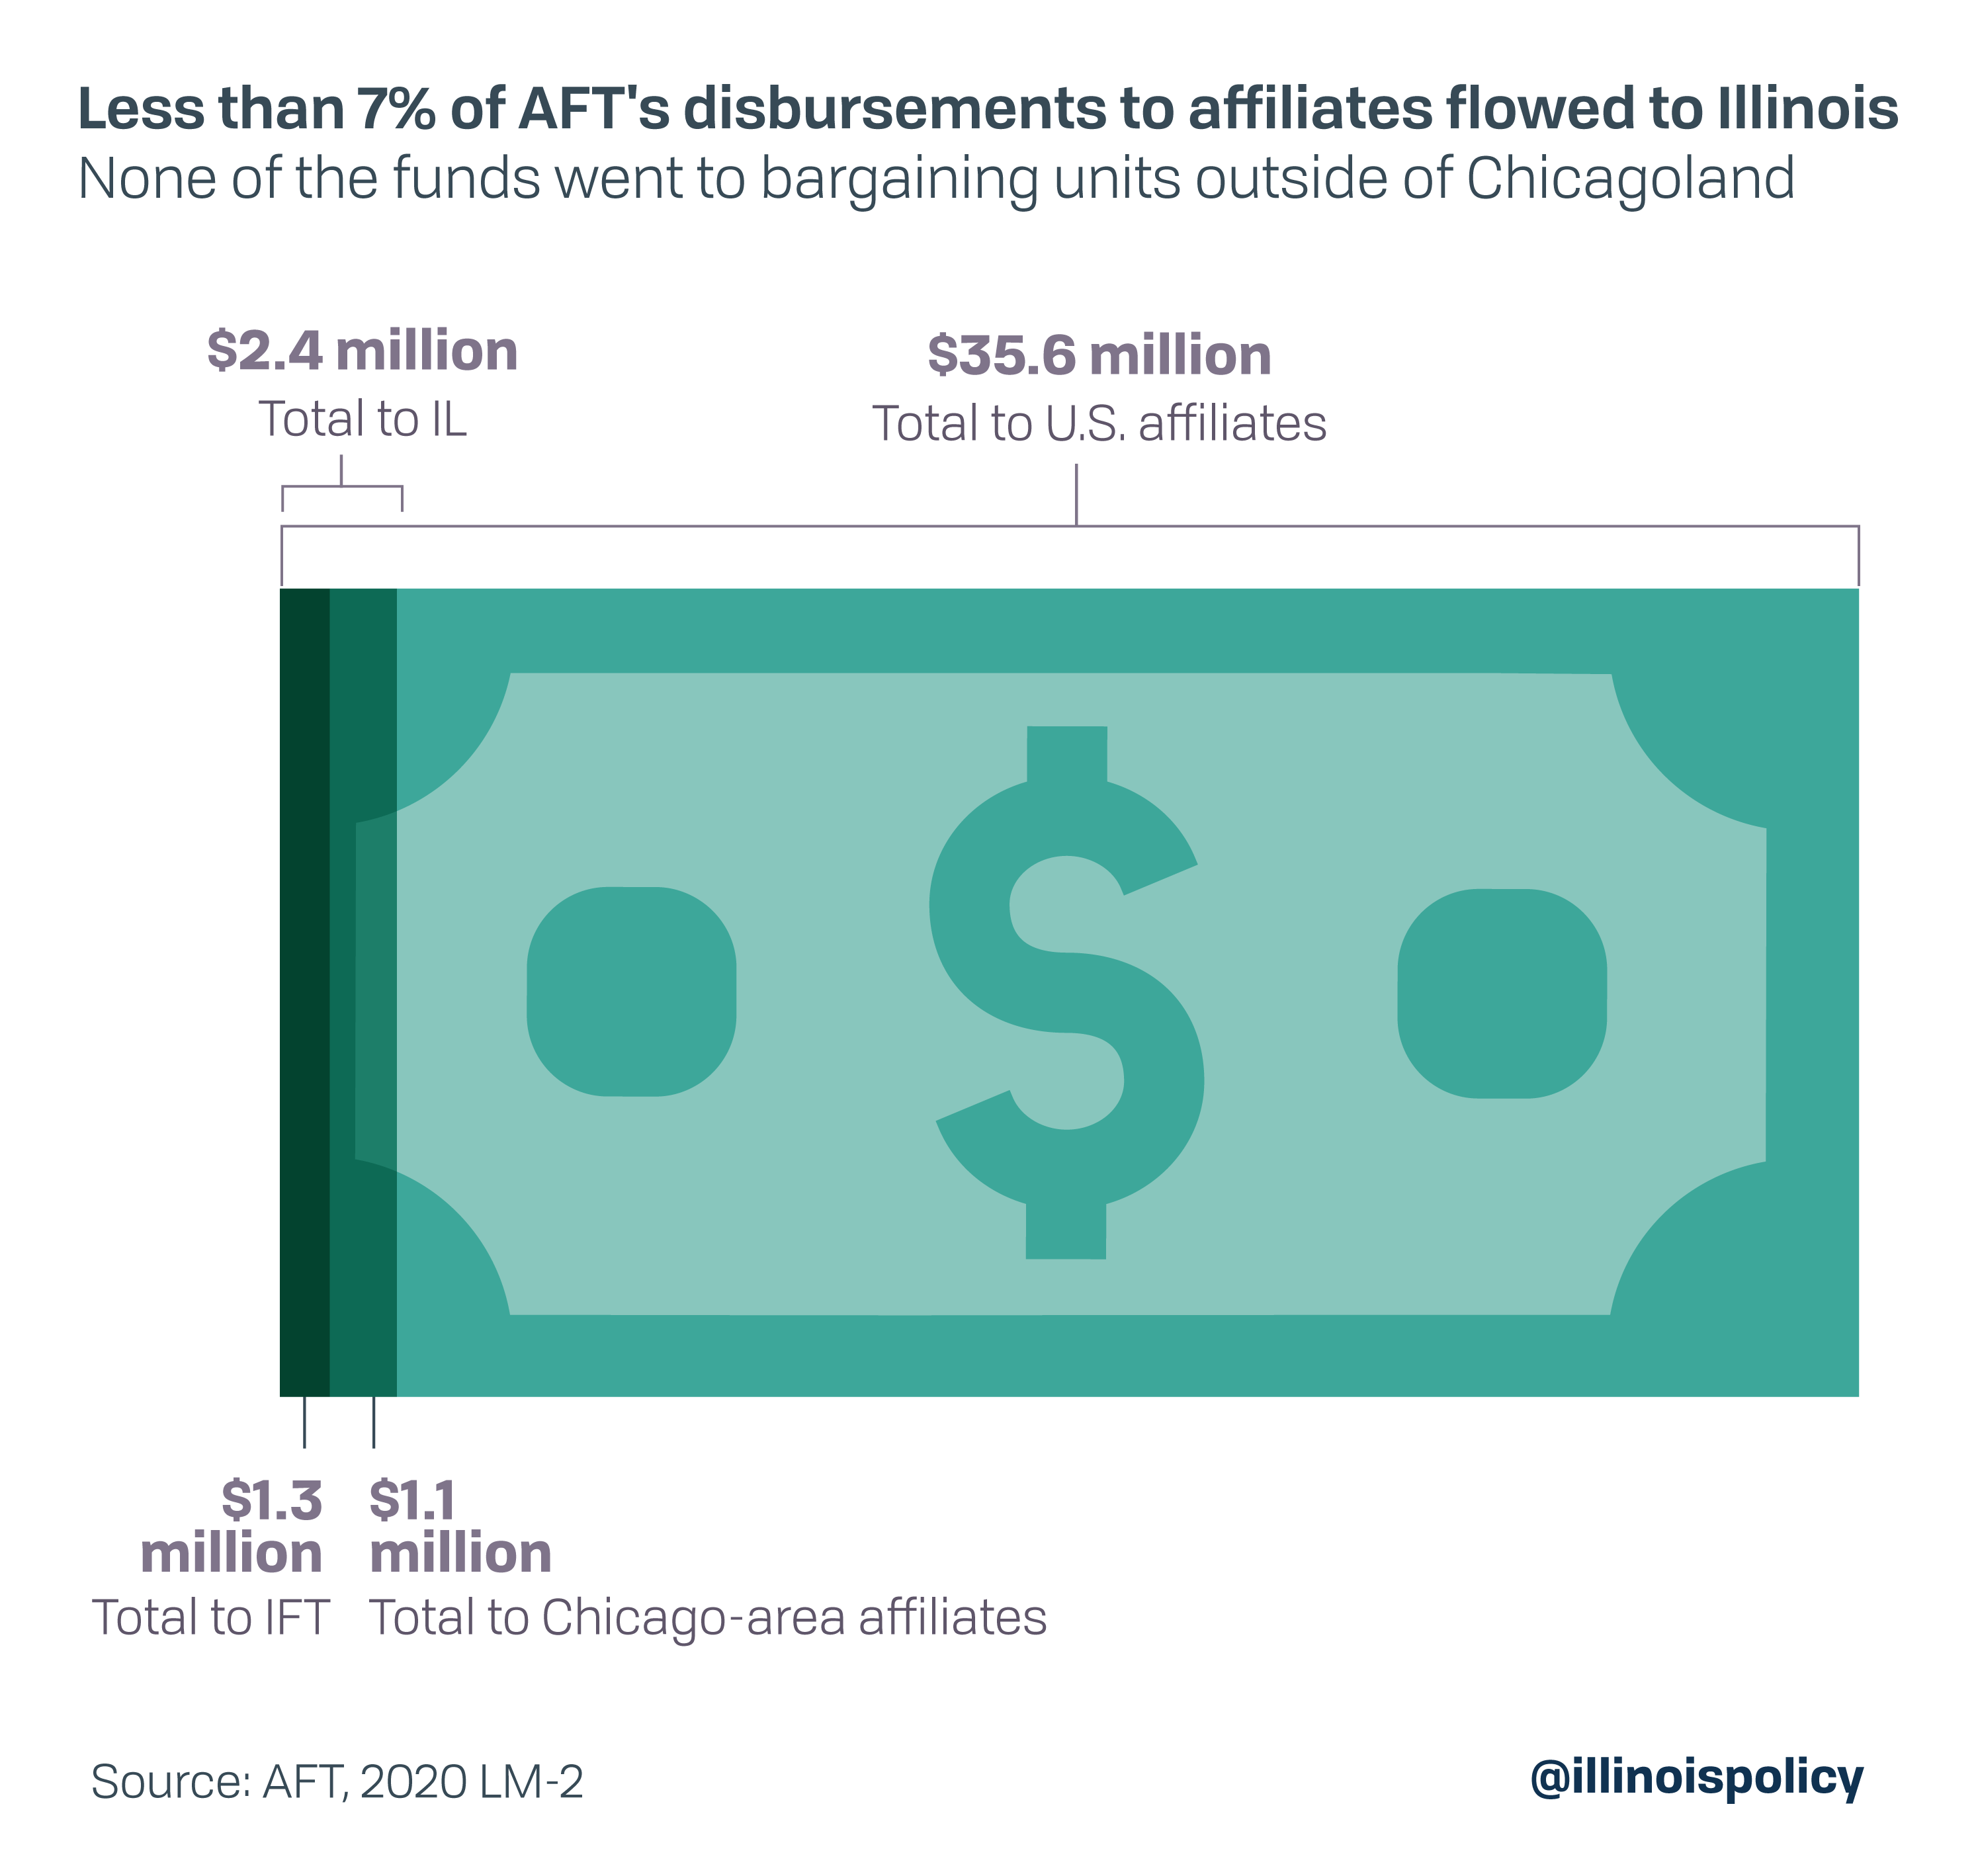 Less than 7% of AFT's disbursements to affiliates flowed to Illinois